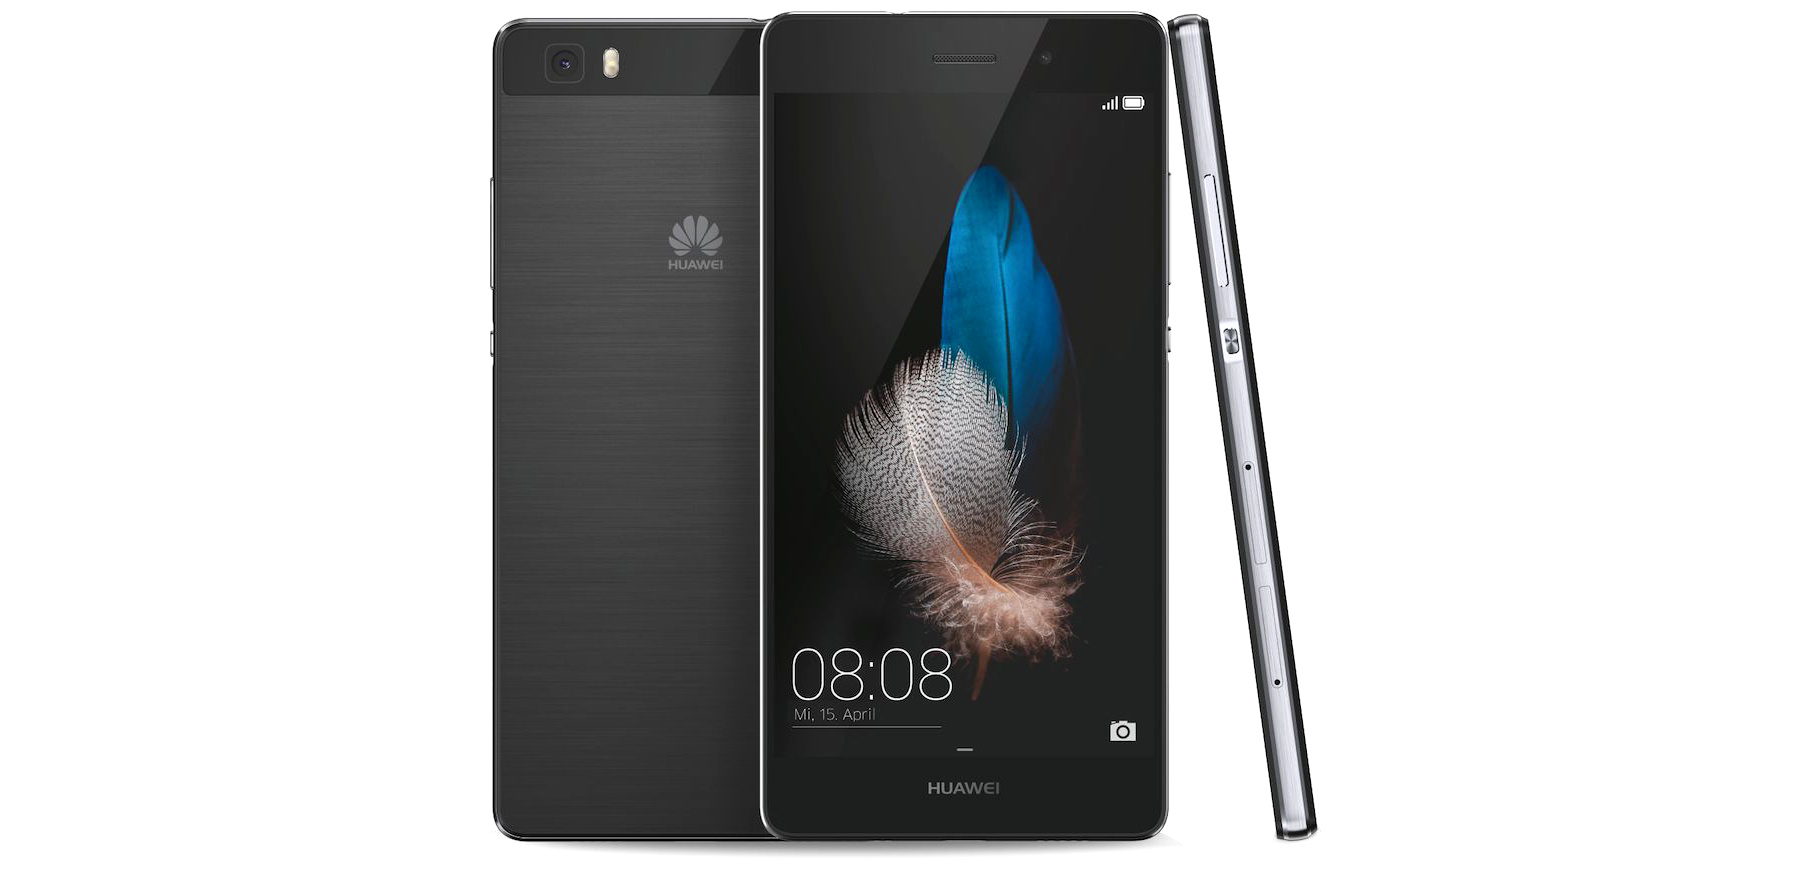 profiel Of later Oeps Huawei announces budget friendly P8 lite In US